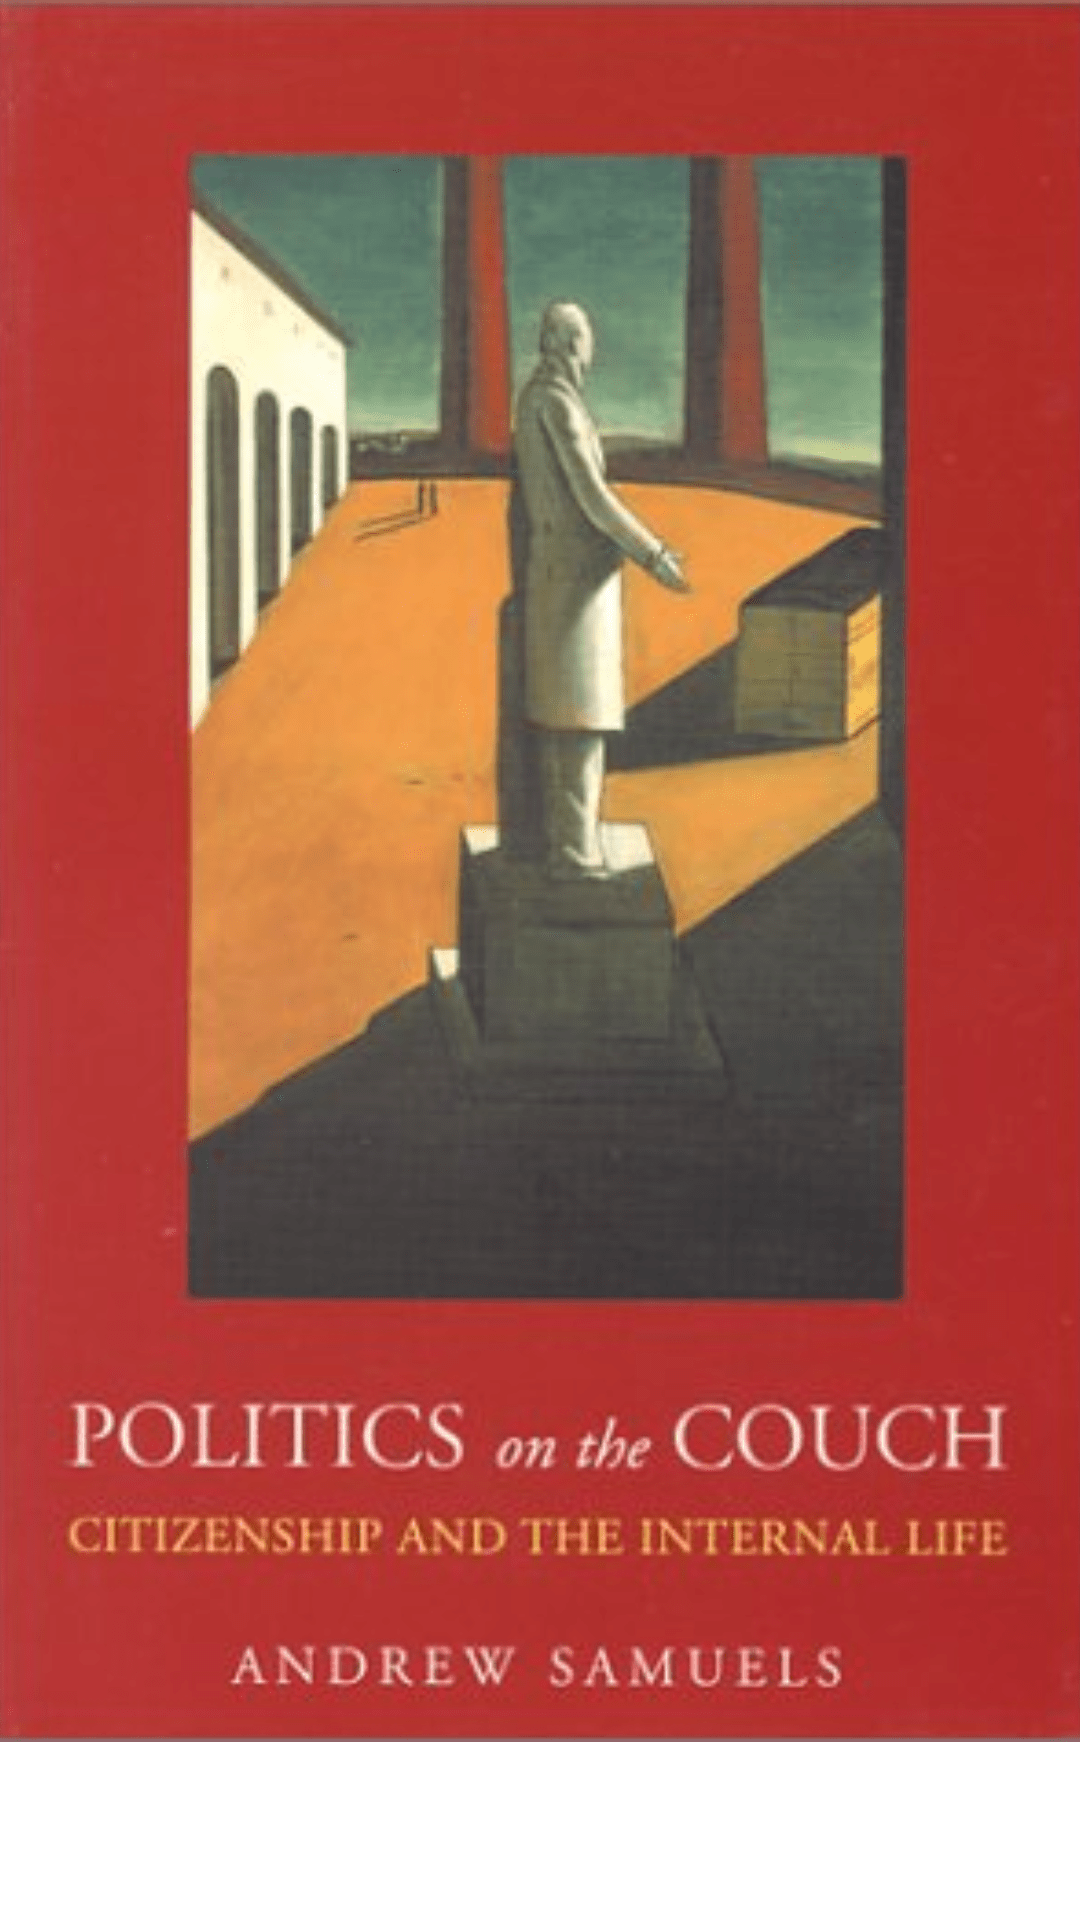 Politics on the Couch by Andrew Samuels